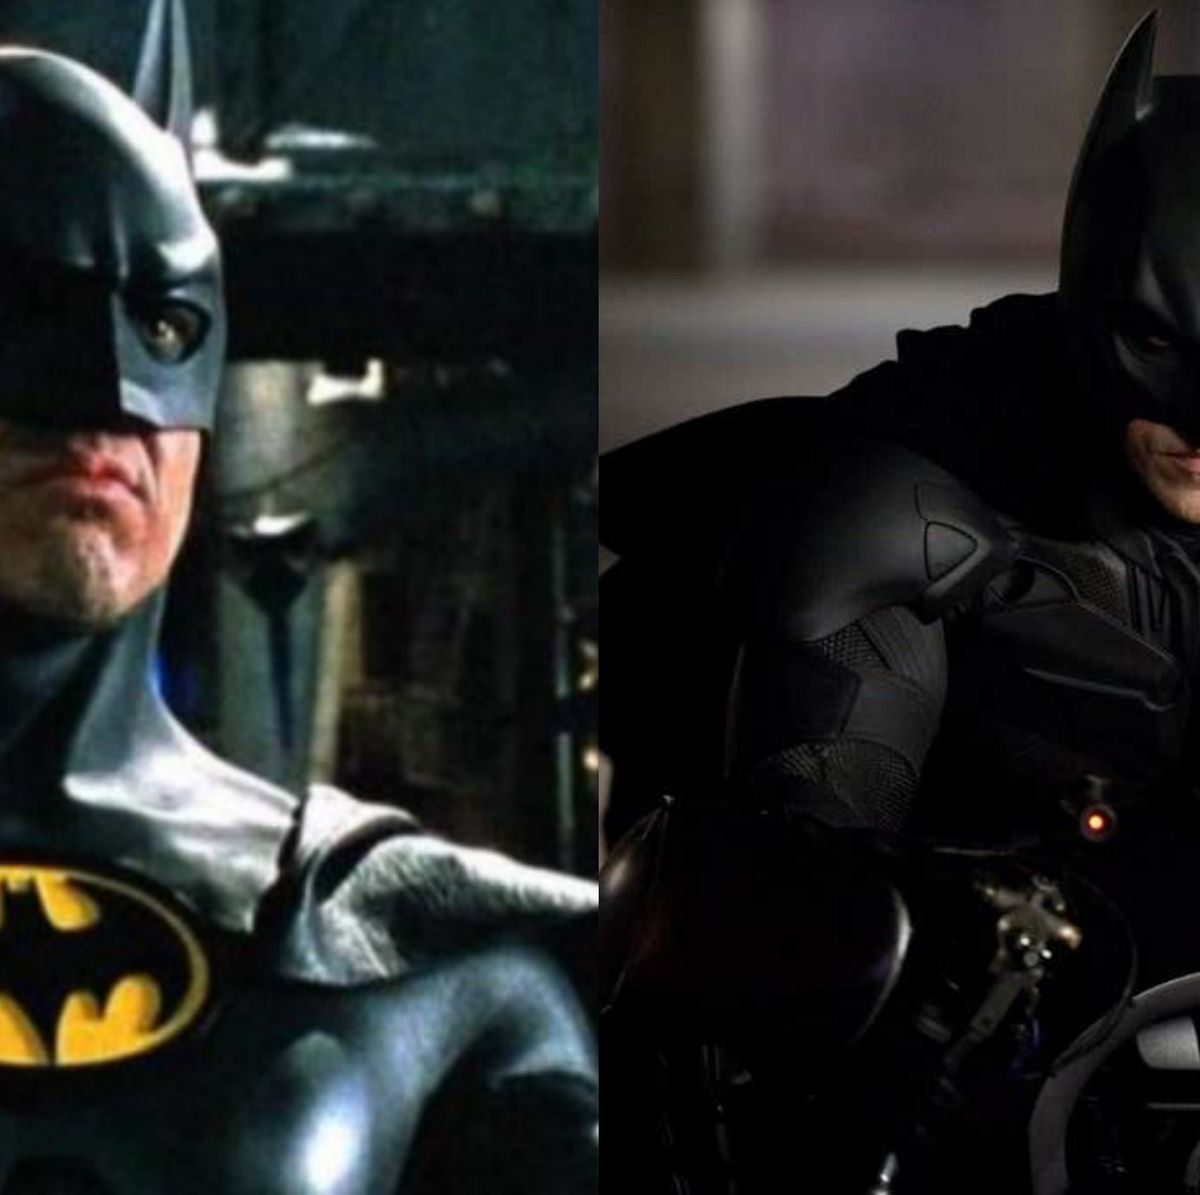 Who Is the Best Batman? New Poll Says America Thinks Christian Bale Is the  Best Batman Actor